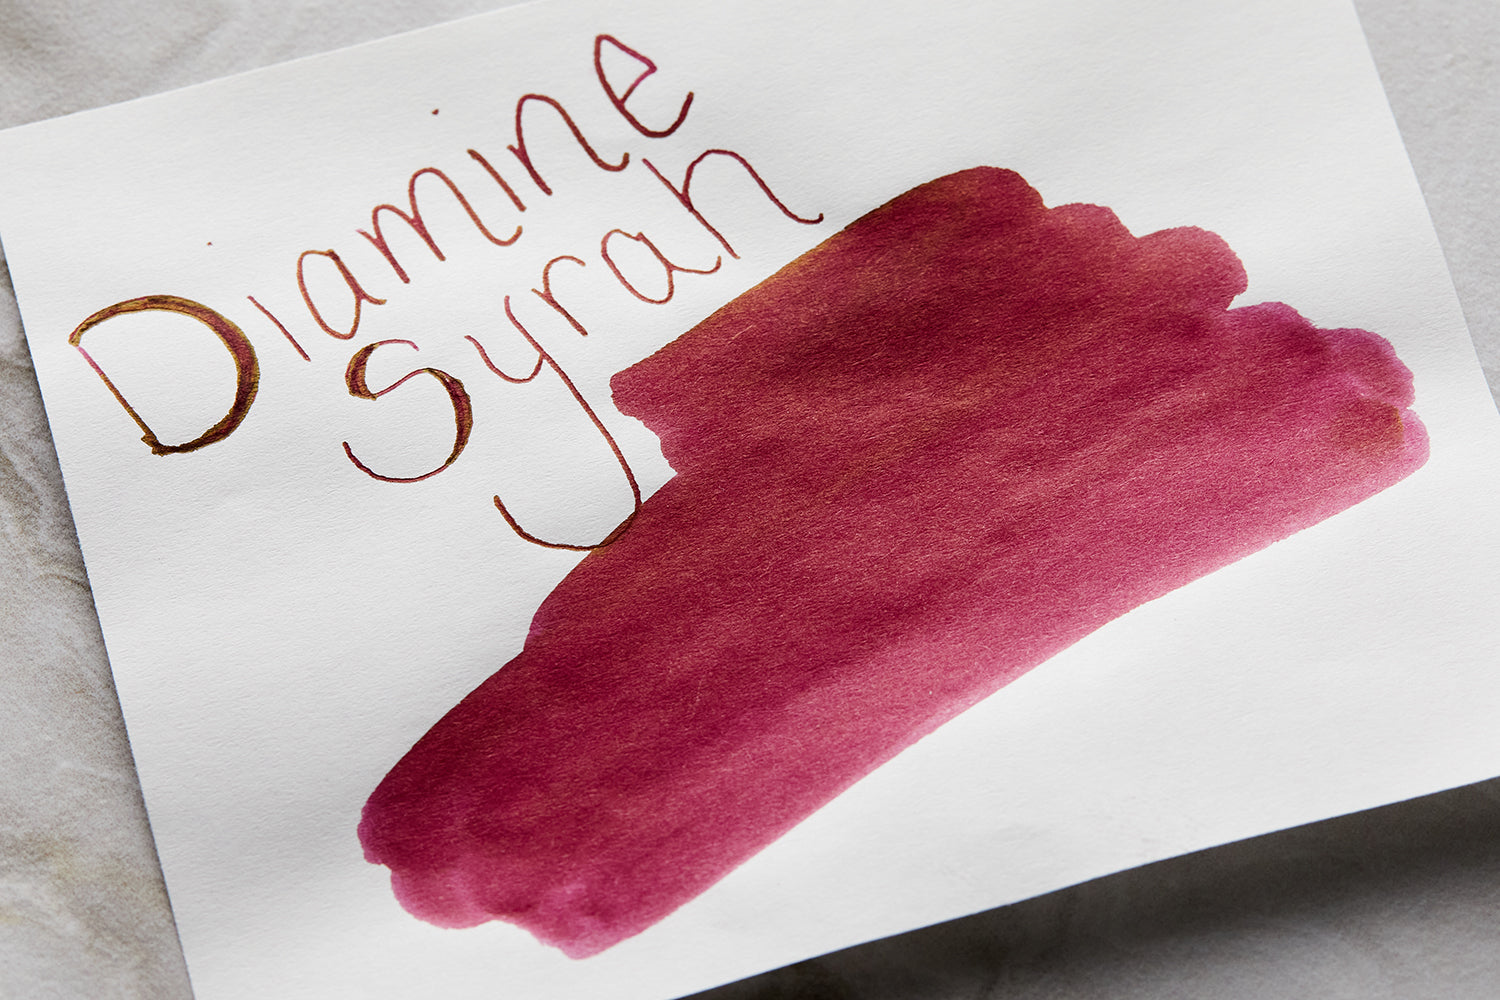 Diamine Syrah fountain pen ink drawing sample on white paper